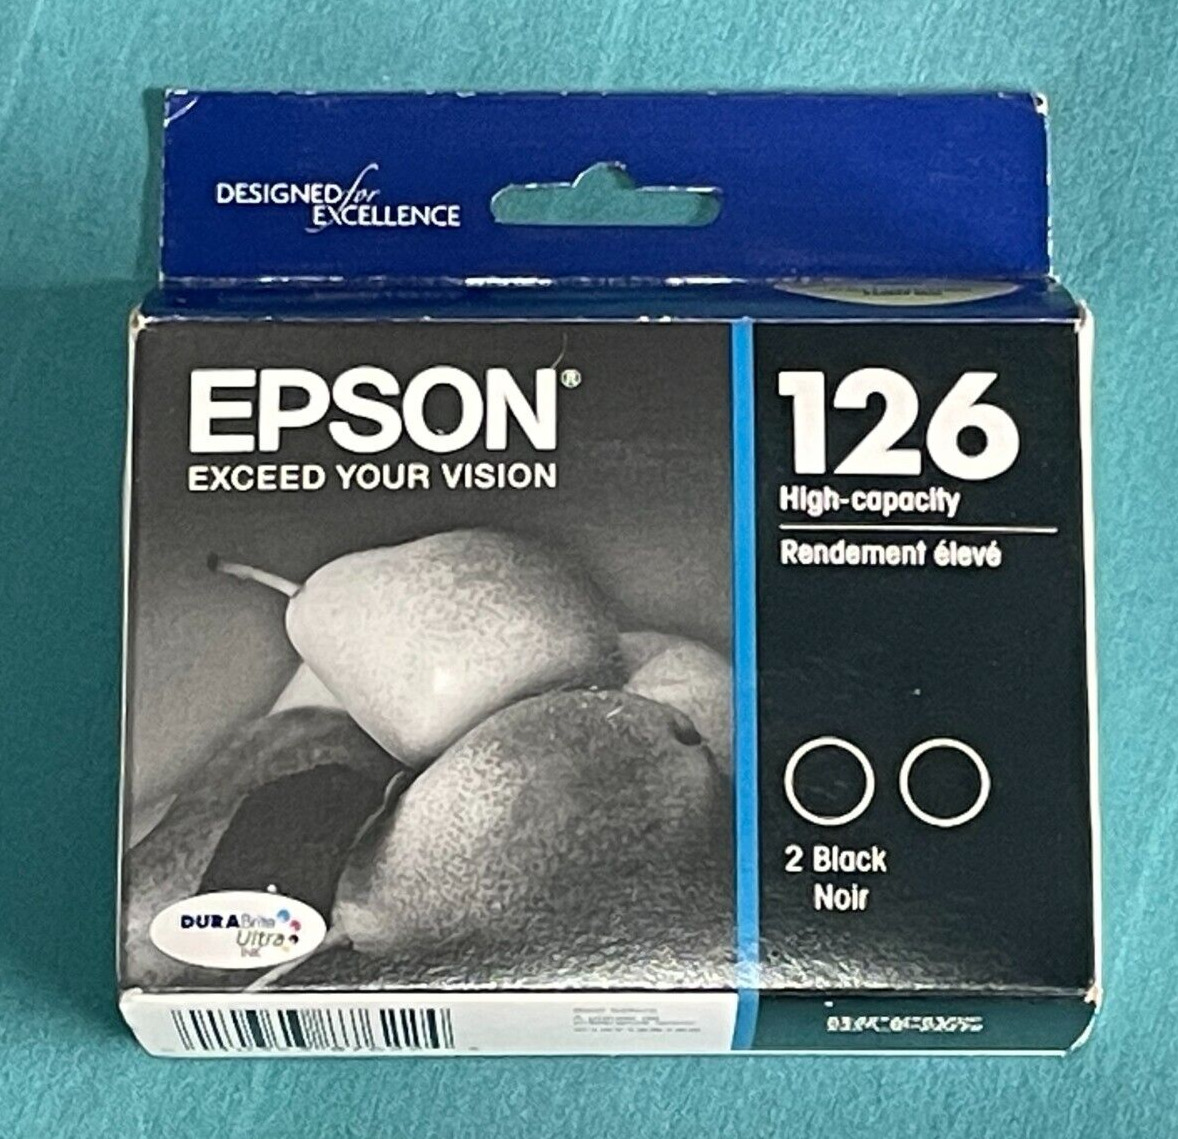 Epson 126 Black 2 Cartridges Included {NEW_UNOPENED} exp 05/2023